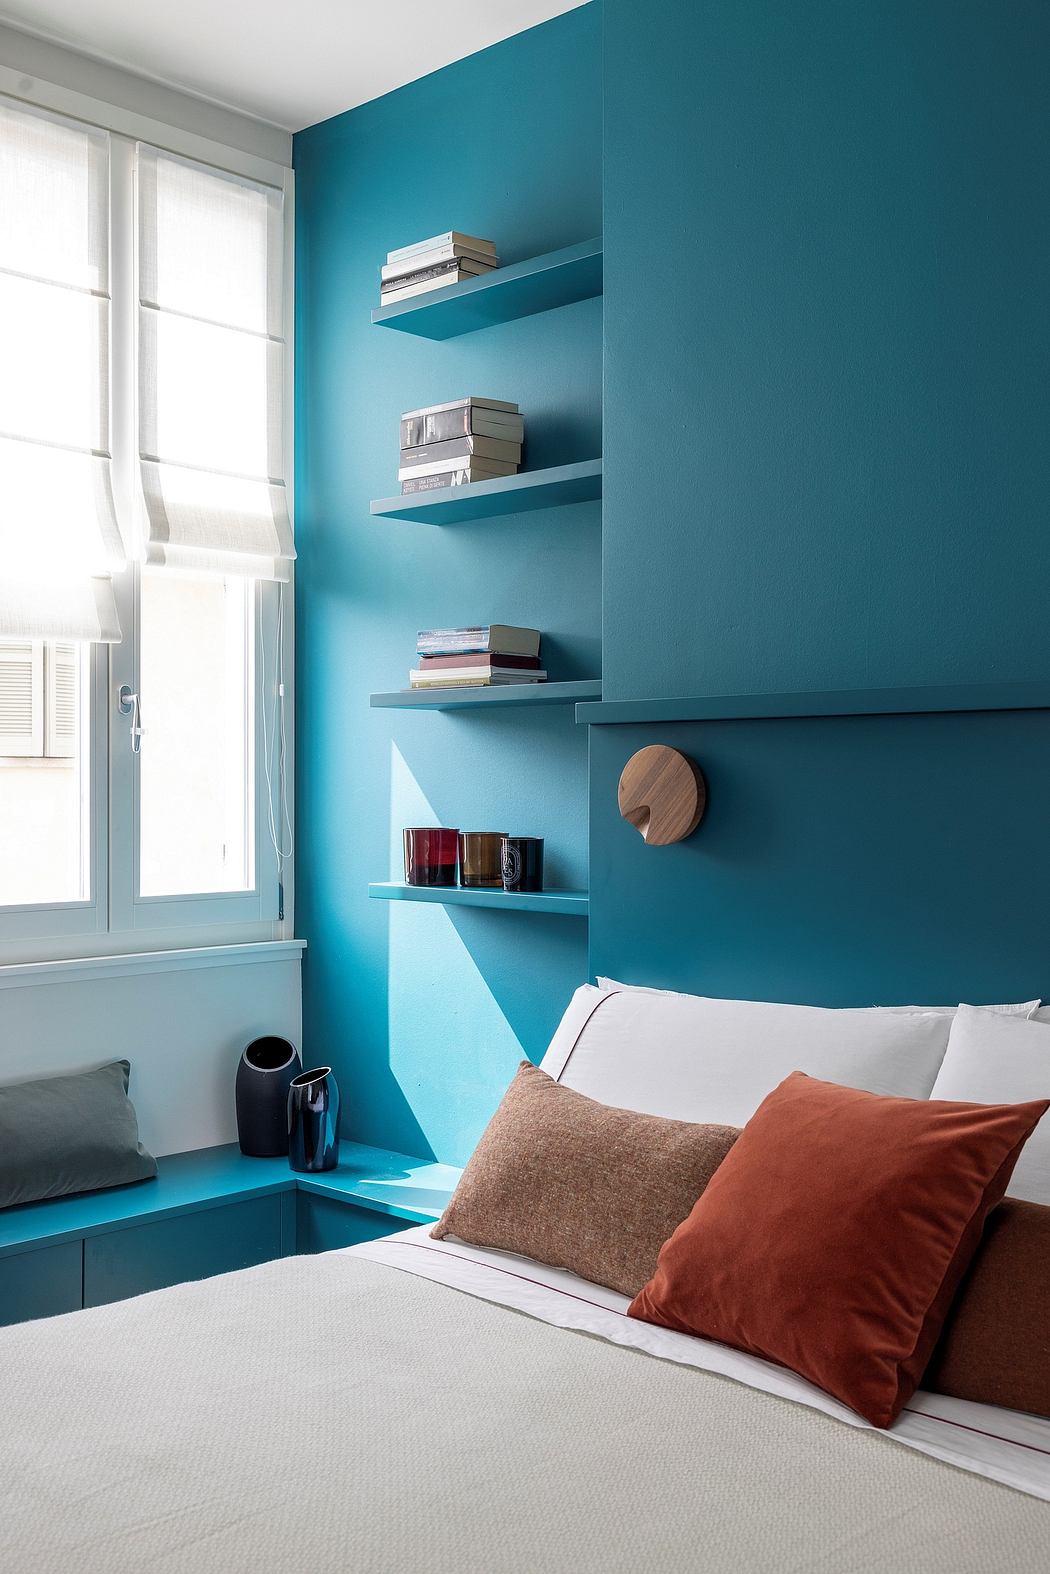 Vibrant teal walls, floating shelves, and cozy seating create a modern, inviting space.